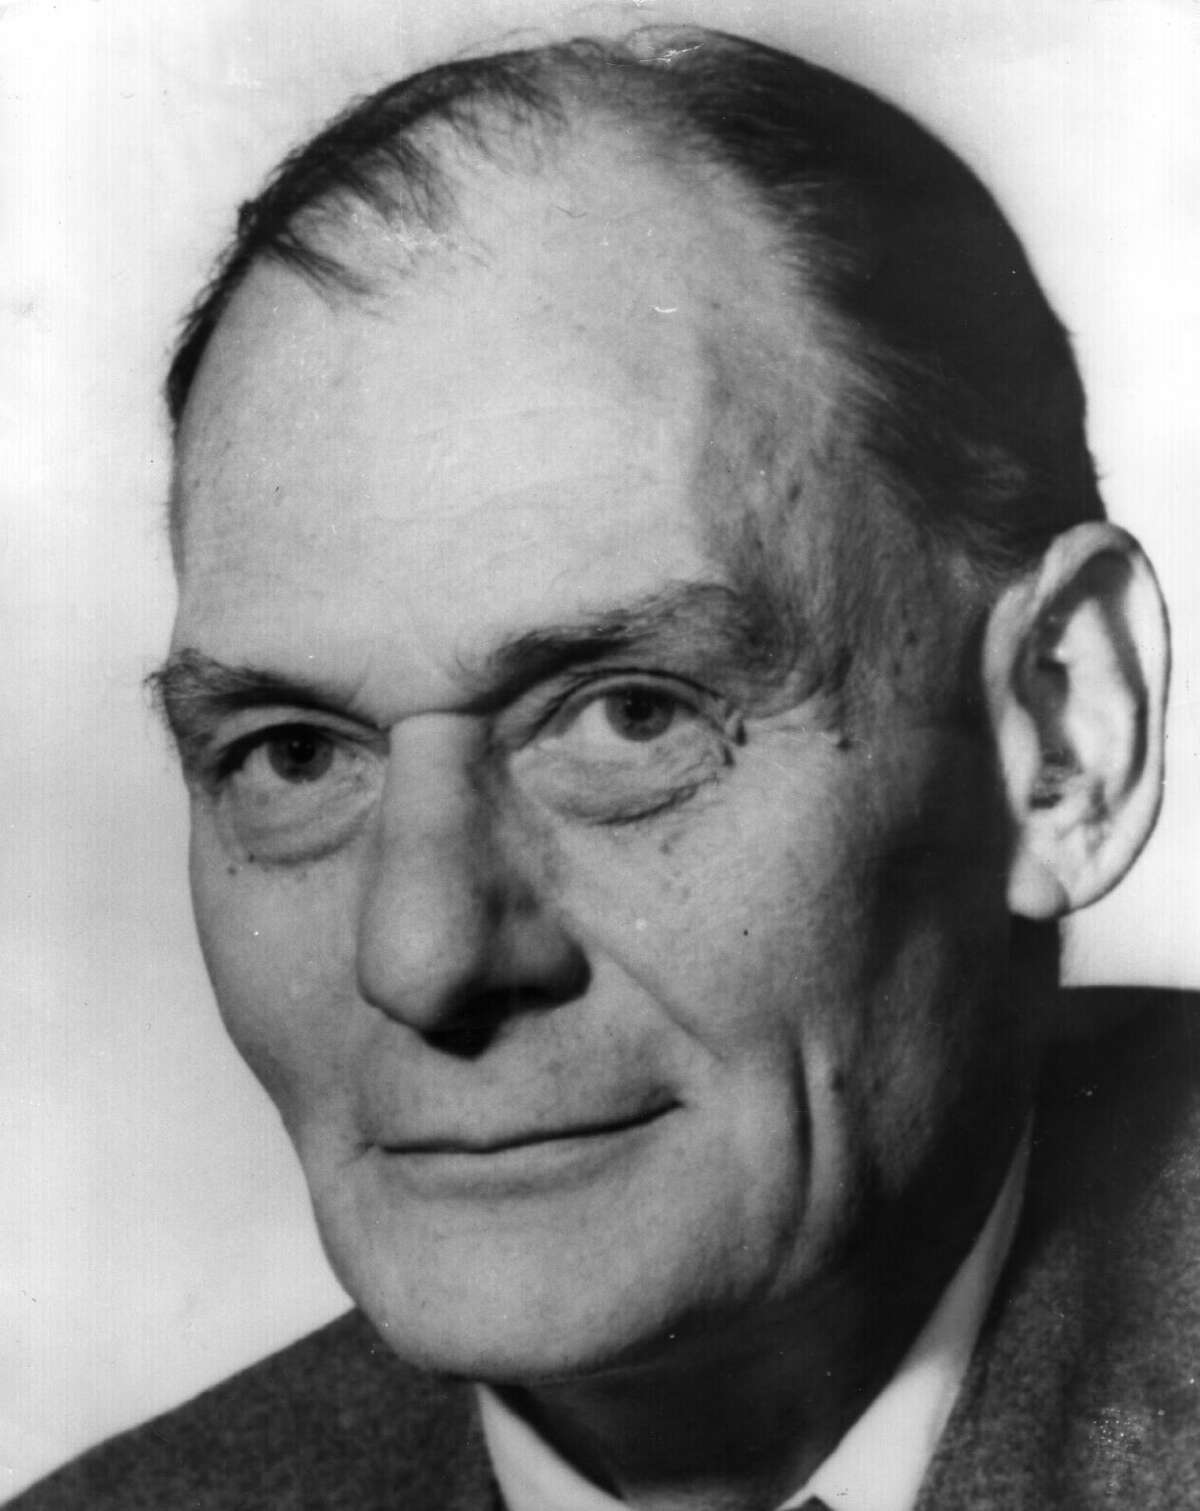 circa 1955: Professor John Franklin Enders (1897 - 1985), the bacteriologist who shared the Nobel prize in 1954 for research into poliomyelitis and in 1962 developed a vaccine for measles.